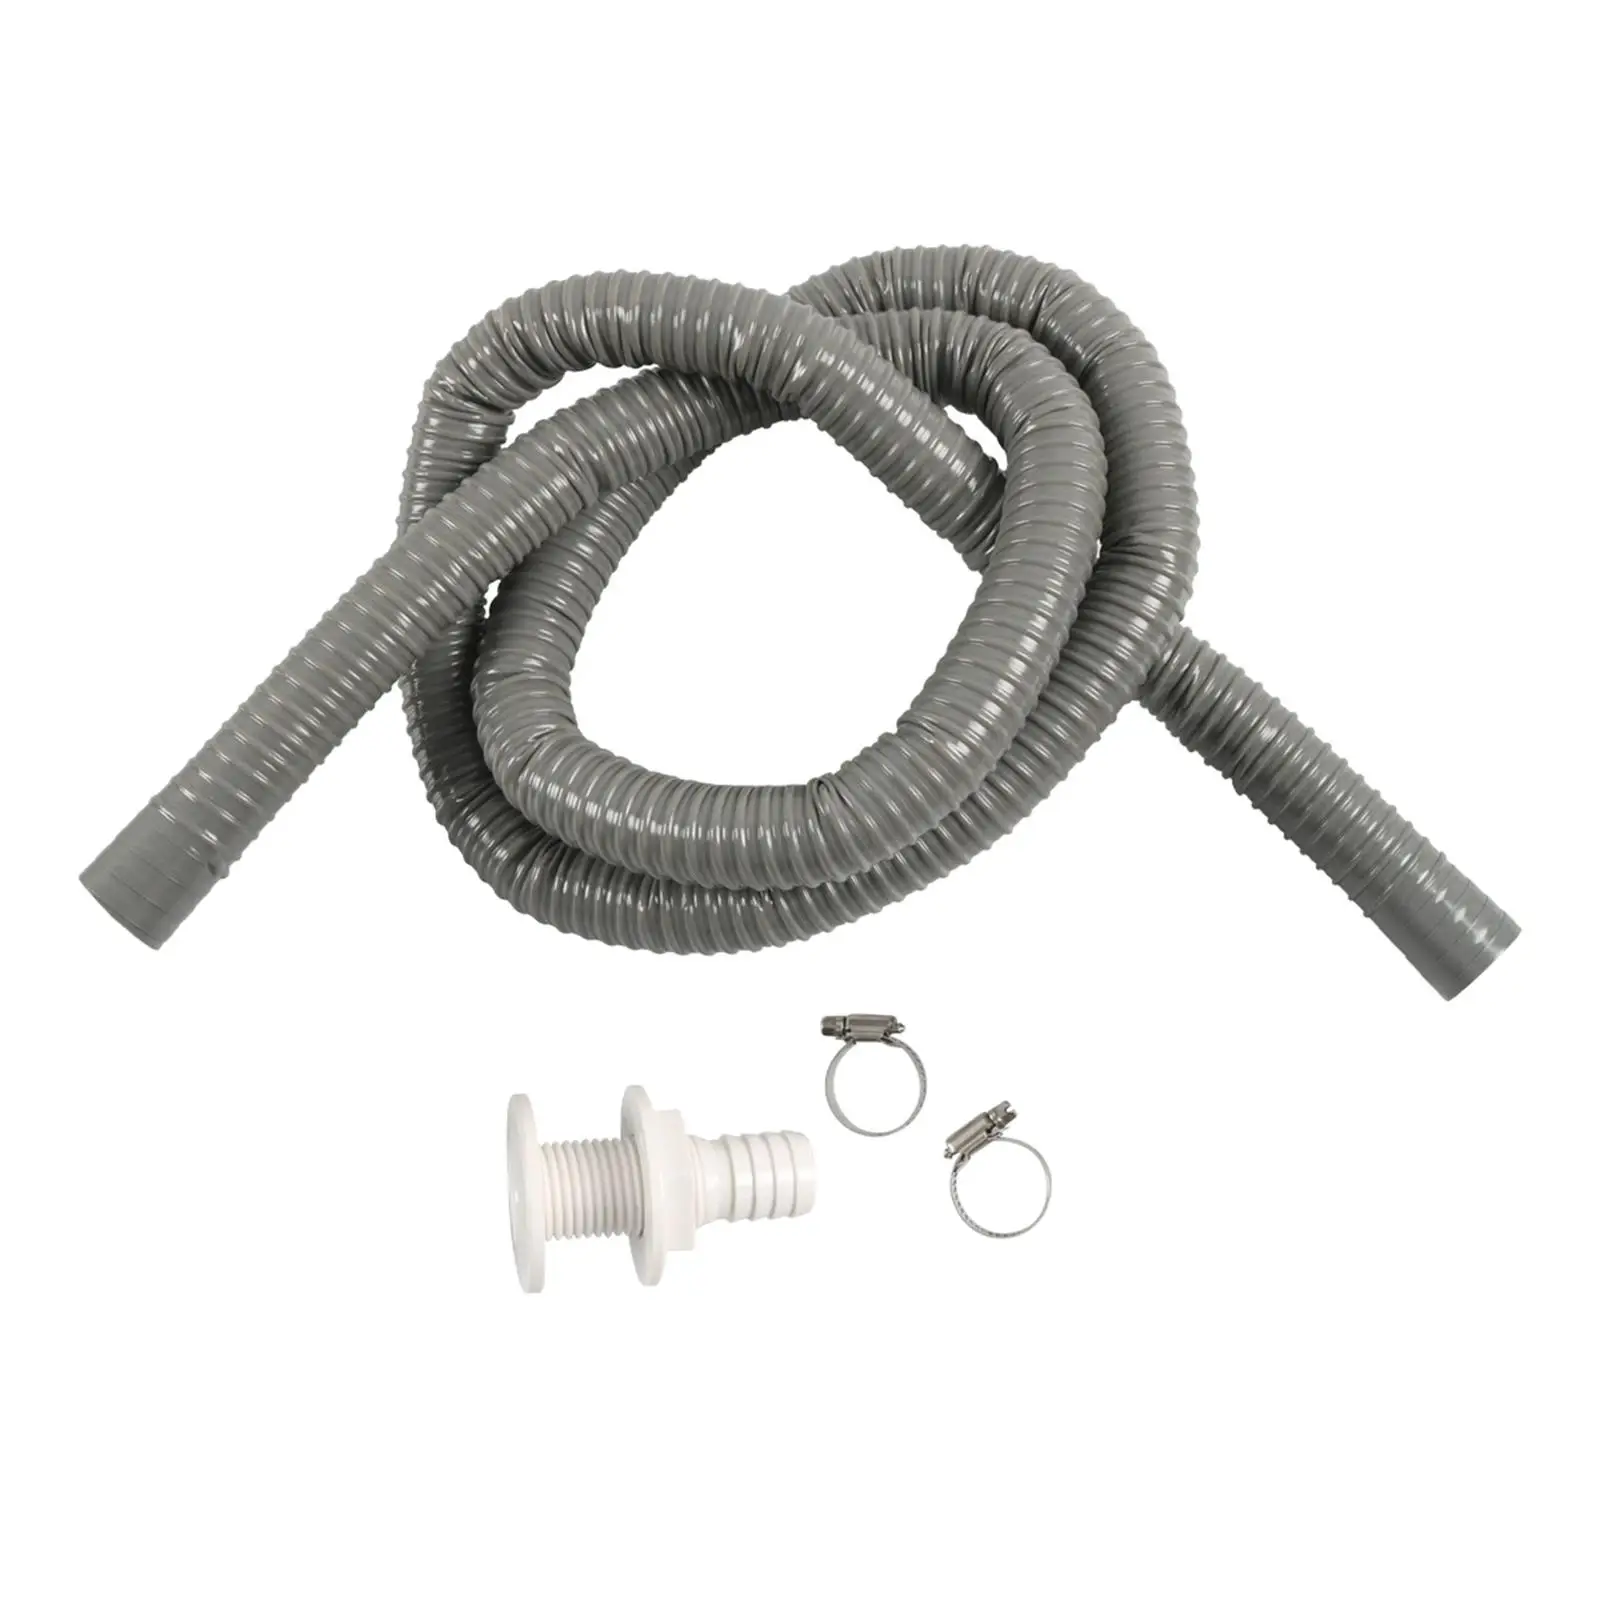 Marine Hose Bilge Pump Installation with 2 Hose Clamps and thru Hull Fitting Kink Free Flexible 6 Feet Hose for Boats